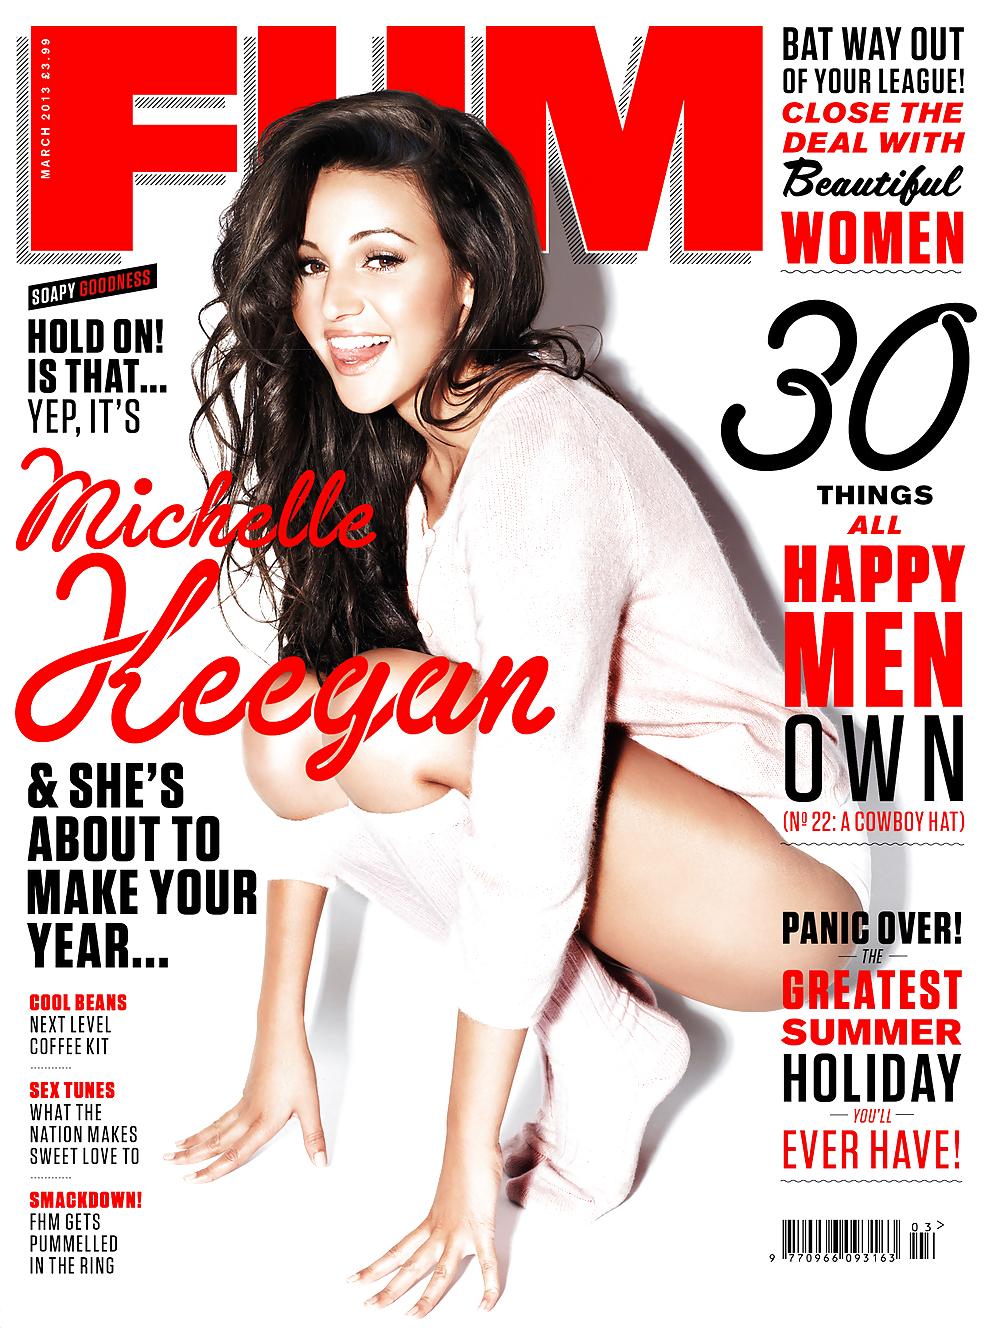 Michelle keegan, new and old fhm pics #14306408